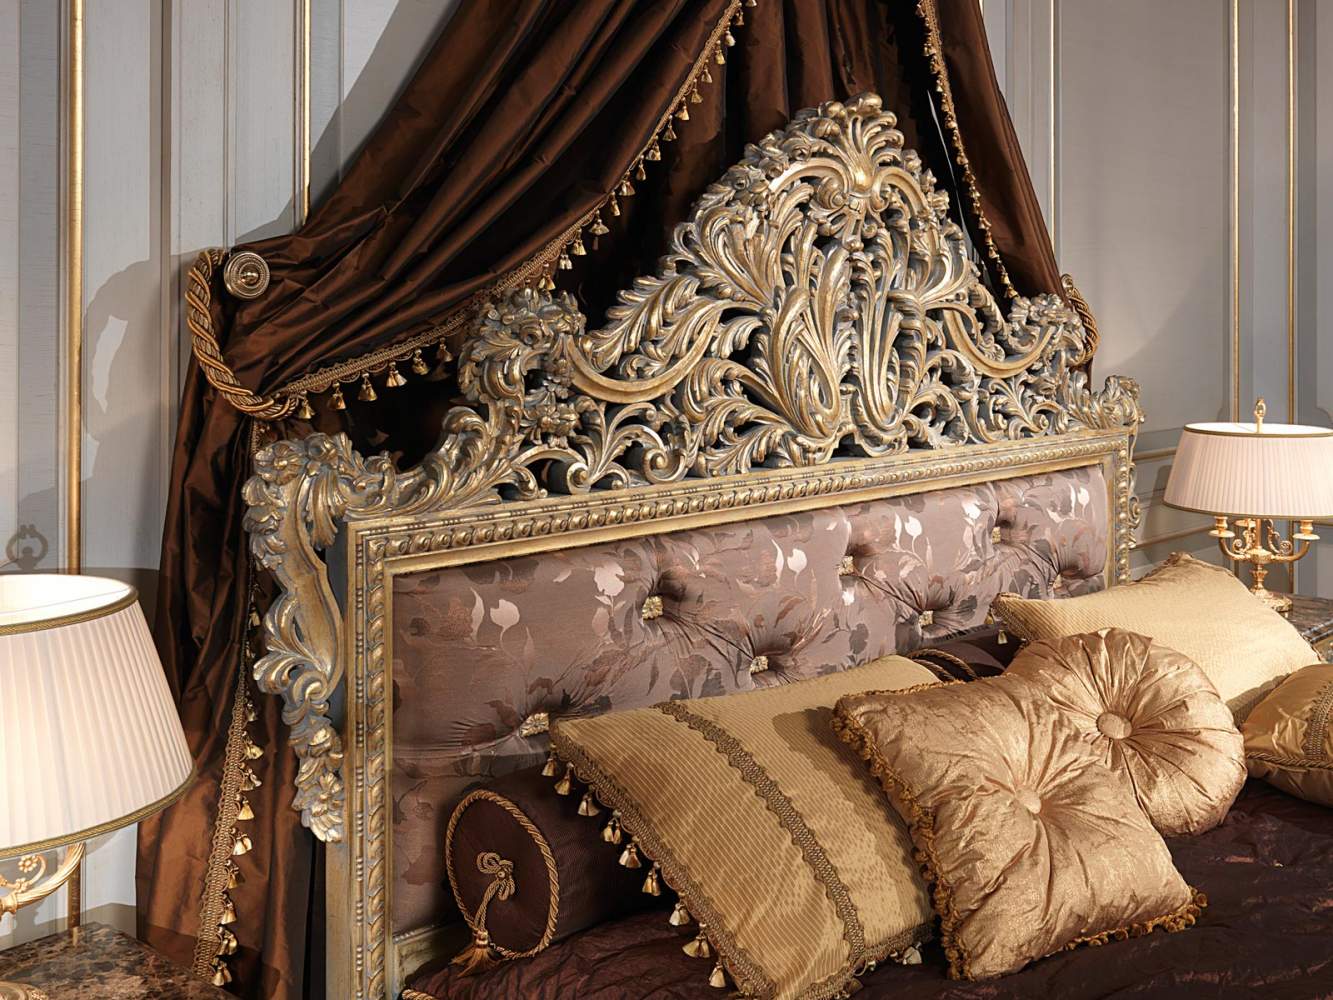 Classic Louis XV Emperador Gold bedroom. Capitonnè headboard with carvings